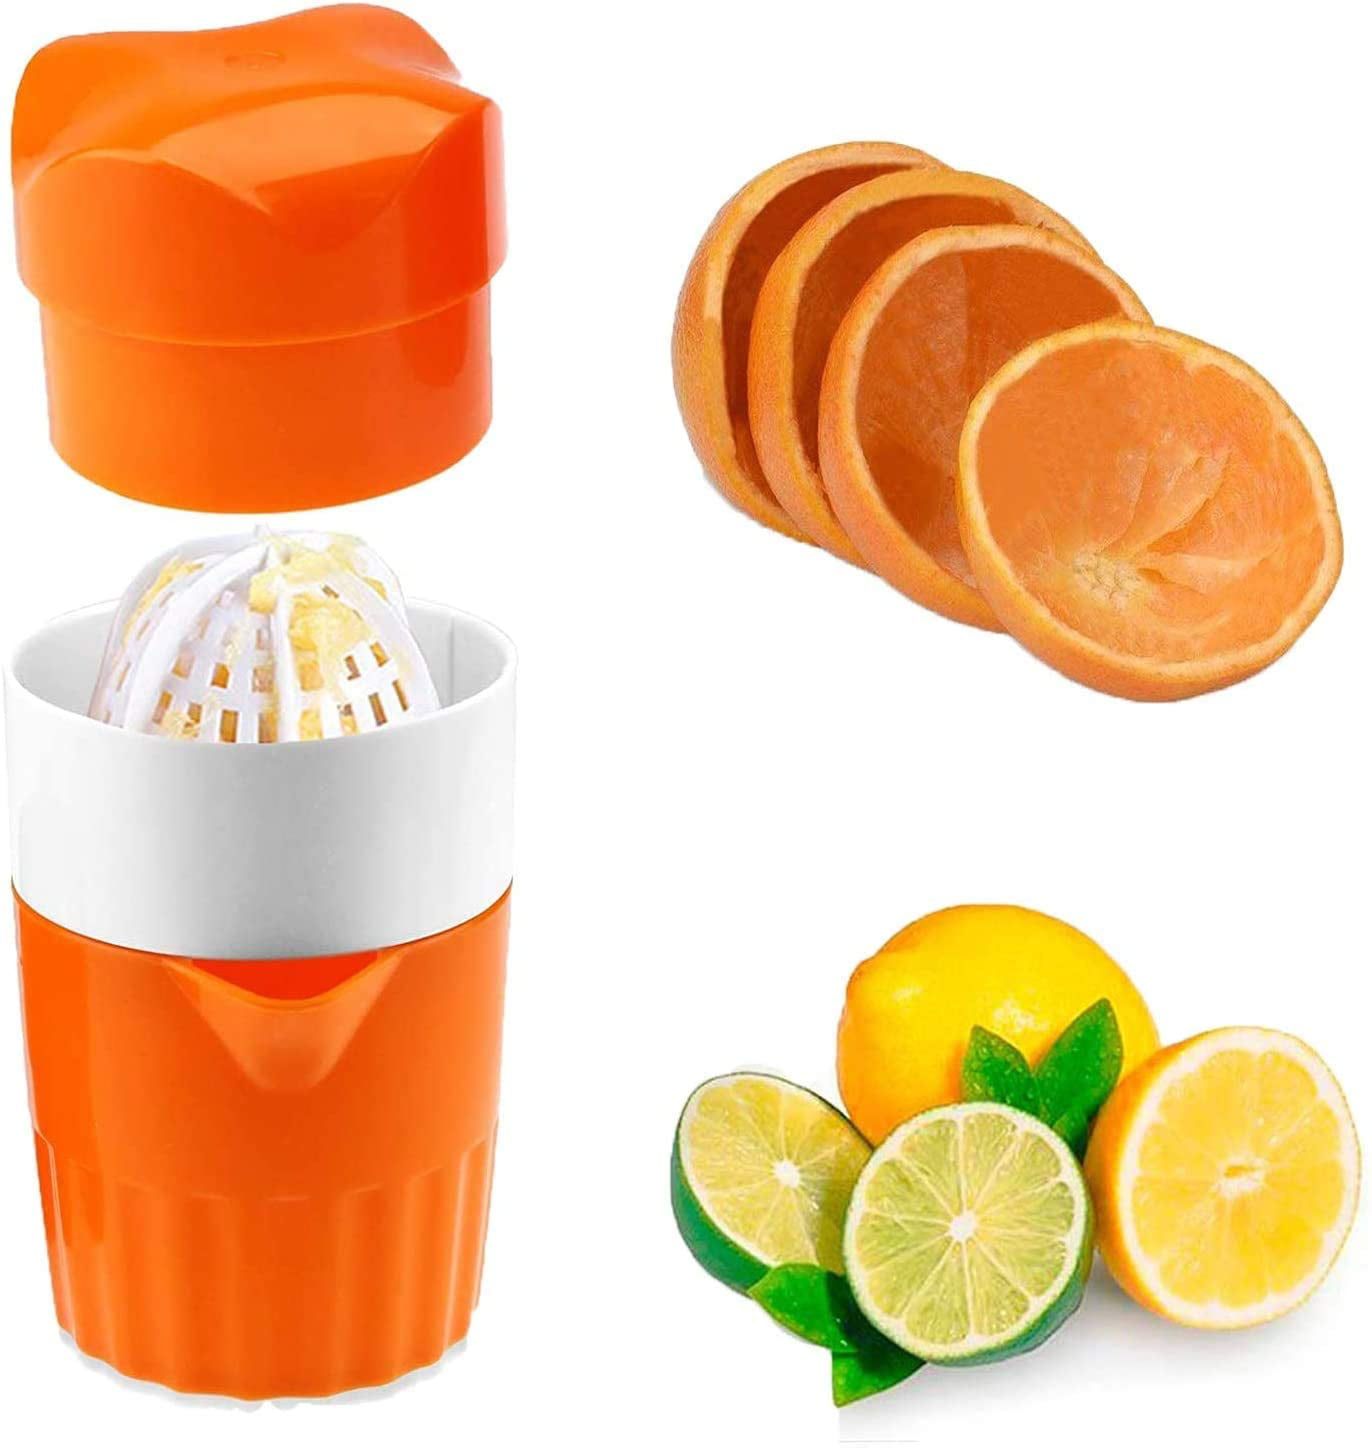 Portable Manual Juicers，Manual Hand Juicer with Strainer and Container White color Citrus Juicer for Lemon,Orange,Lime,